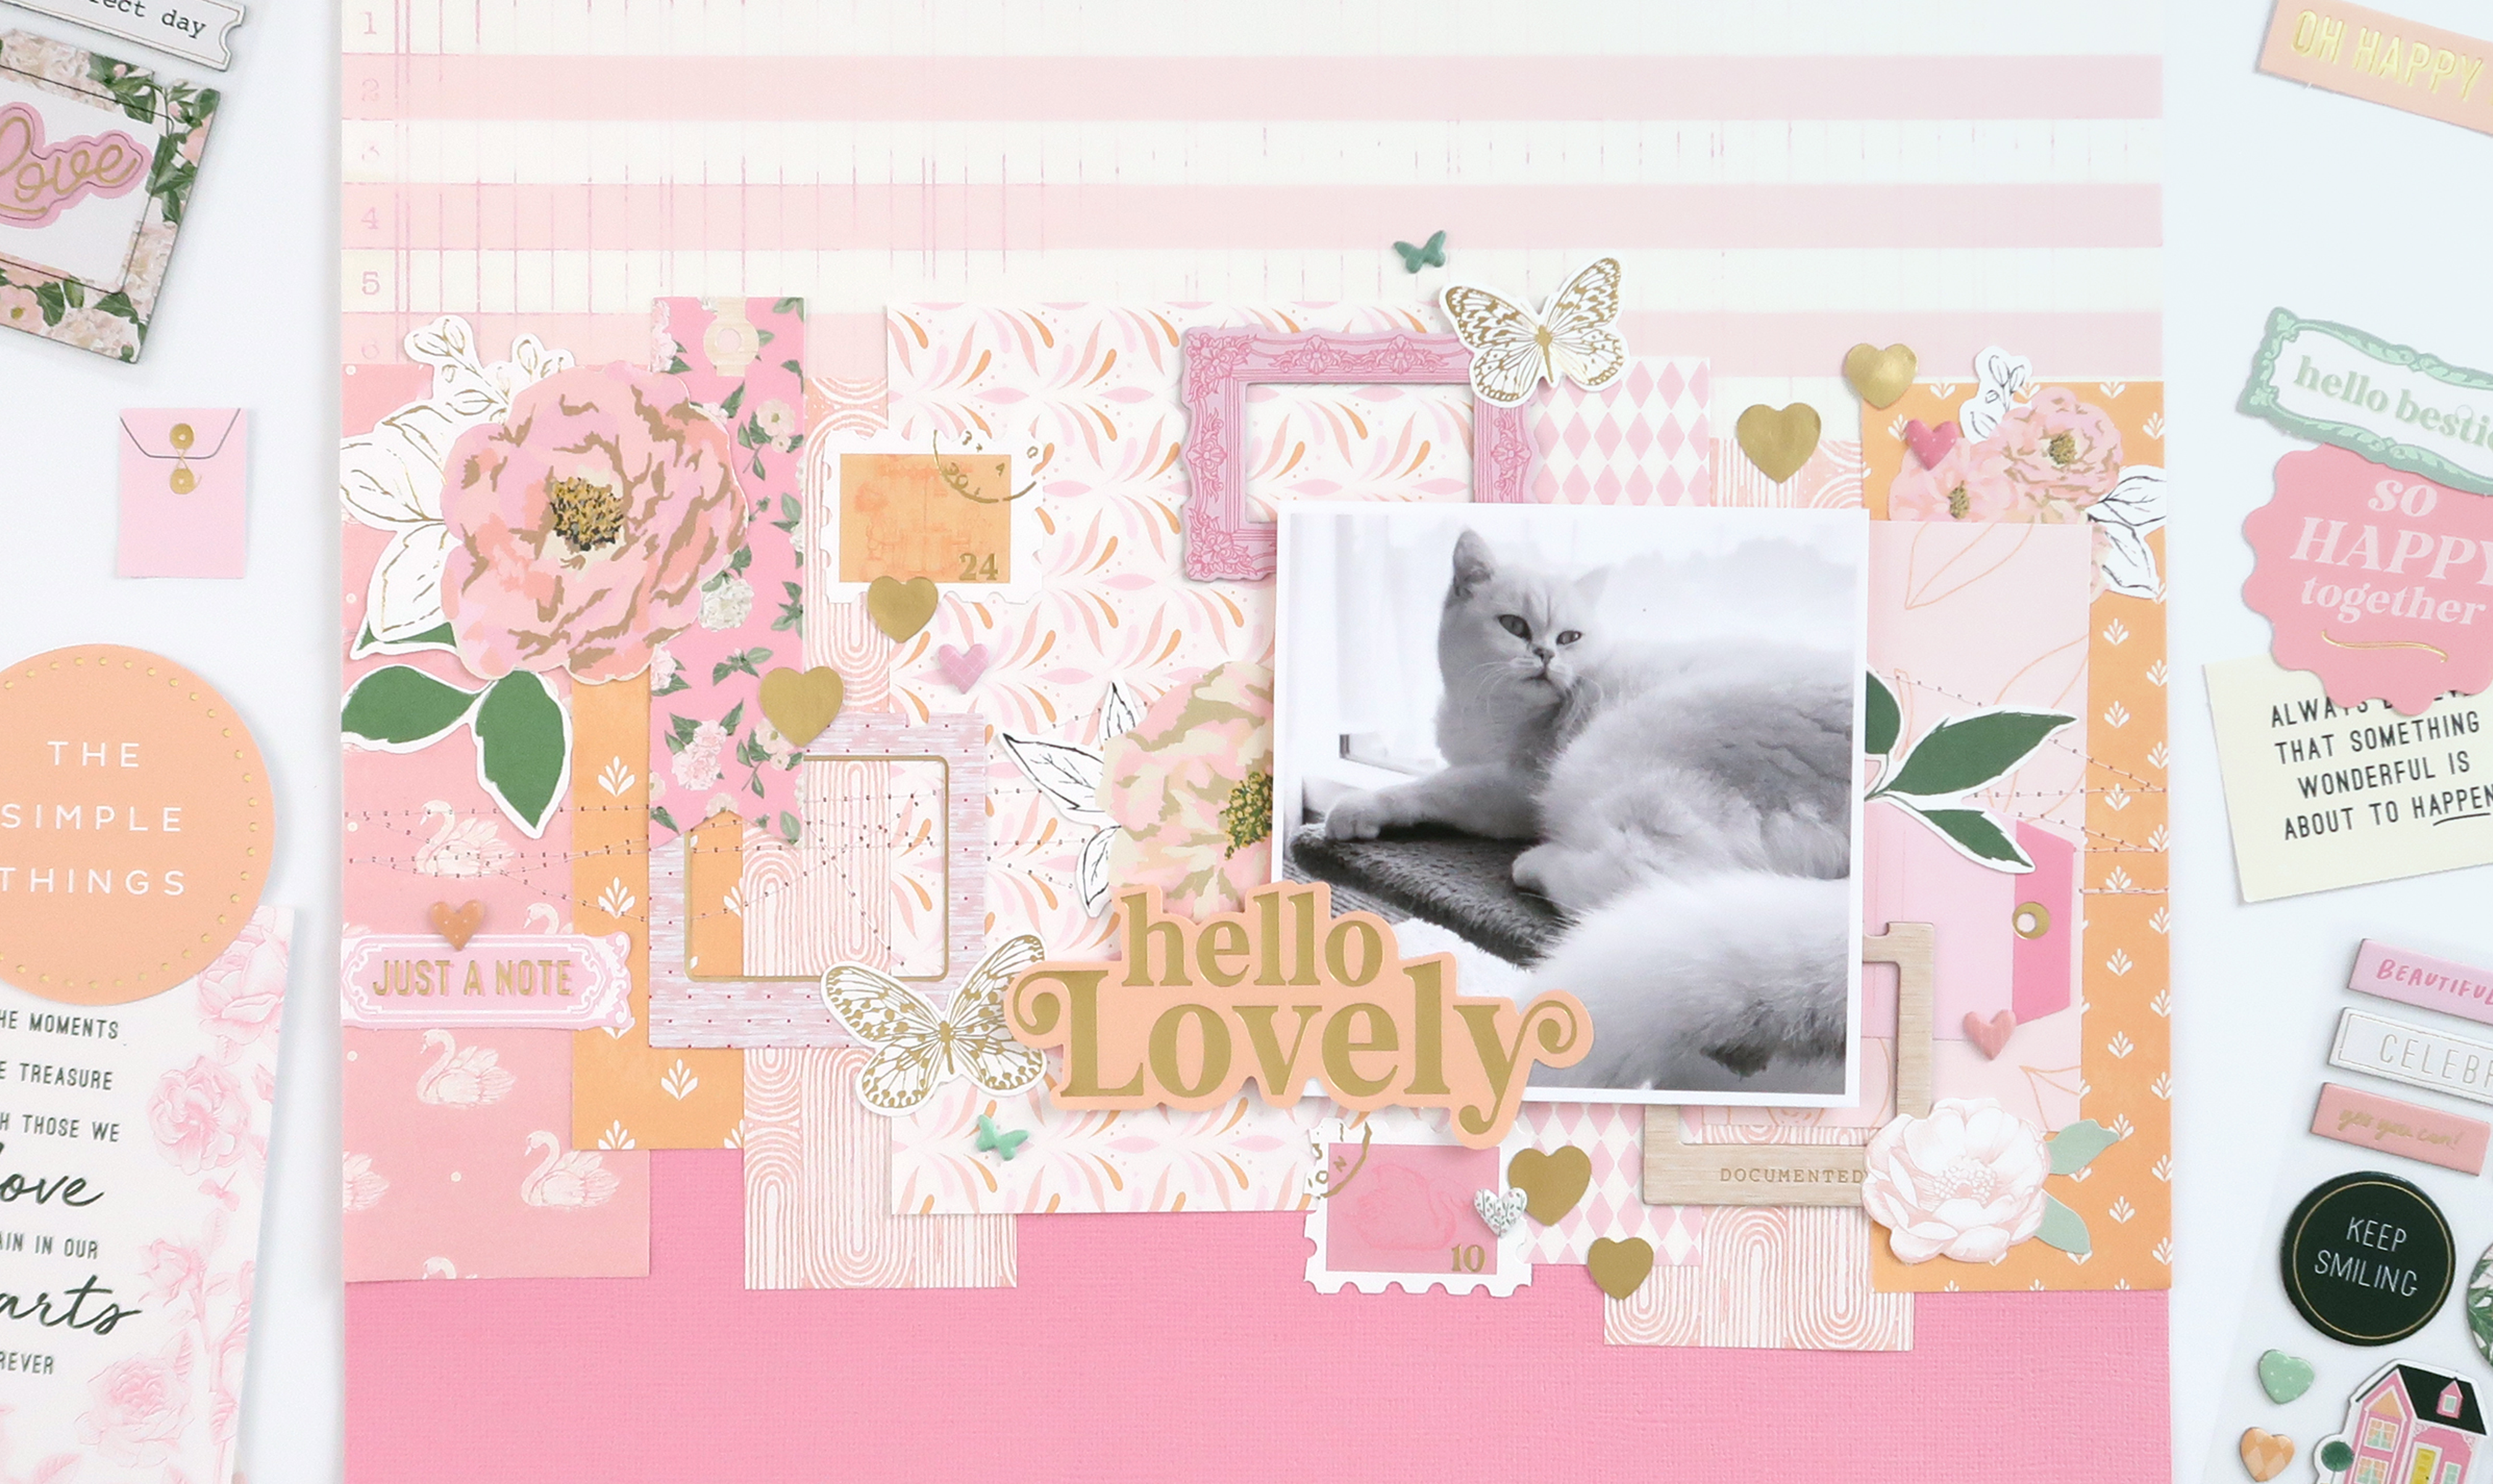 Rosie's Studio Primavera Collection, scrapbook 12x12 layout using 12x12 papers, cardstock ephemera and Dee's beloved cat. Features Butterflies and peony roses and stamps from washing tape.